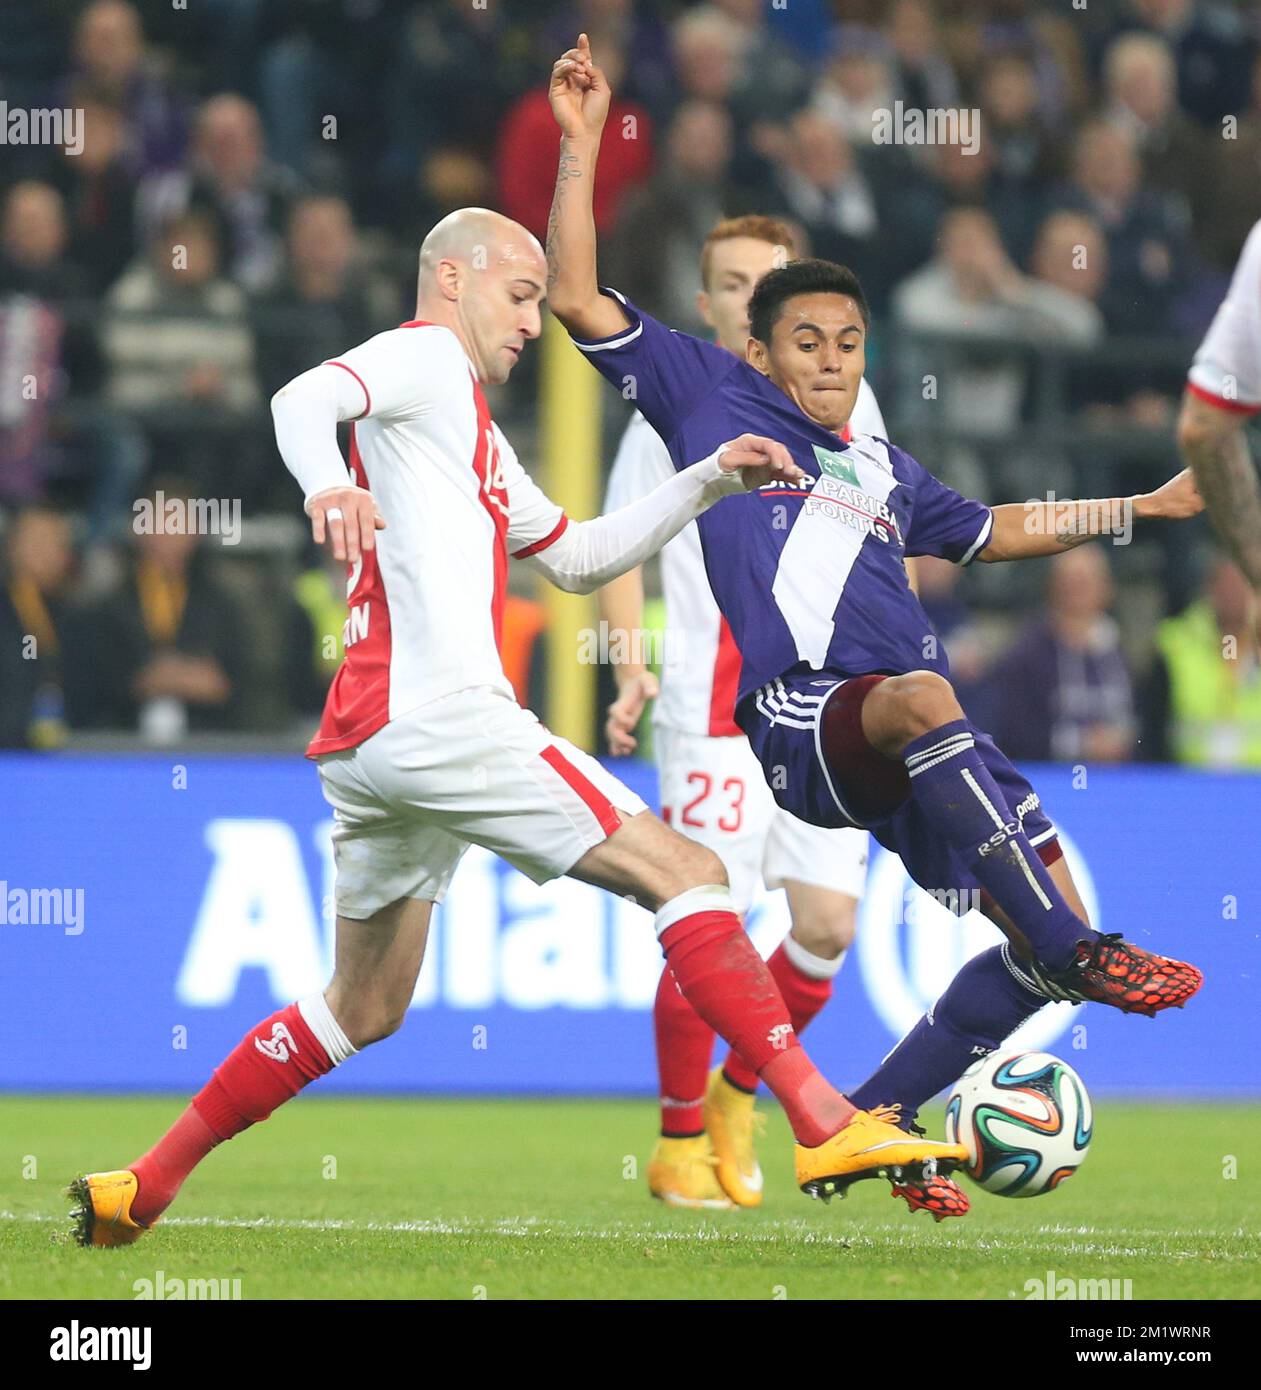 20141026 - BRUSSELS, BELGIUM: Standard's Laurent Ciman and Anderlecht's Andy Najar fight for the ball during the Jupiler Pro League match between RSC Anderlecht and Standard de Liege, in Brussels, Sunday 26 October 2014, on day 12 of the Belgian soccer championship. BELGA PHOTO VIRGINIE LEFOUR Stock Photo